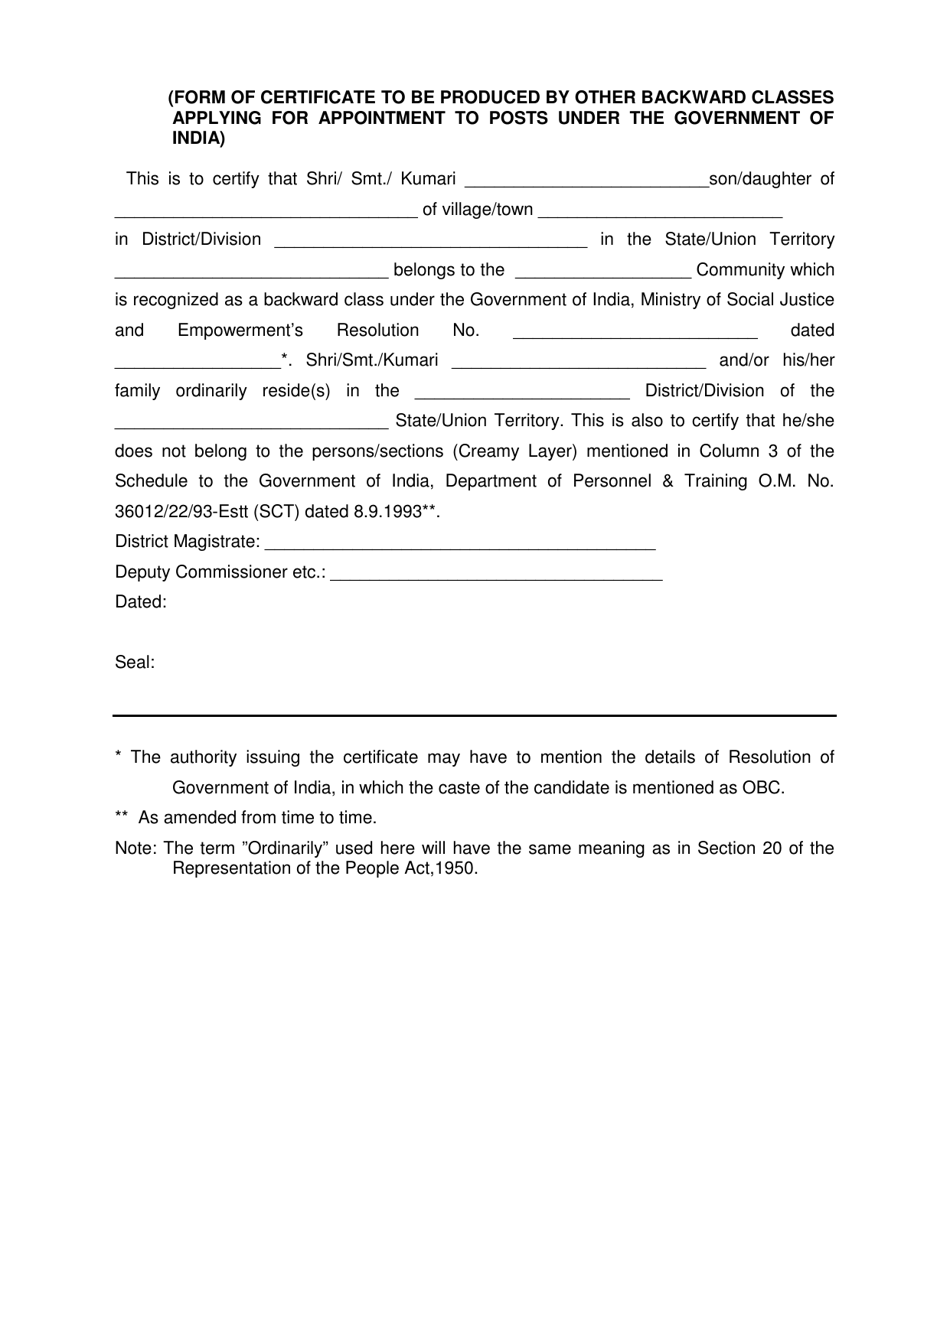 Form of Certificate to Be Produced by Other Backward Classes Applying for Appointment to Posts Under the Government of India - India, Page 1